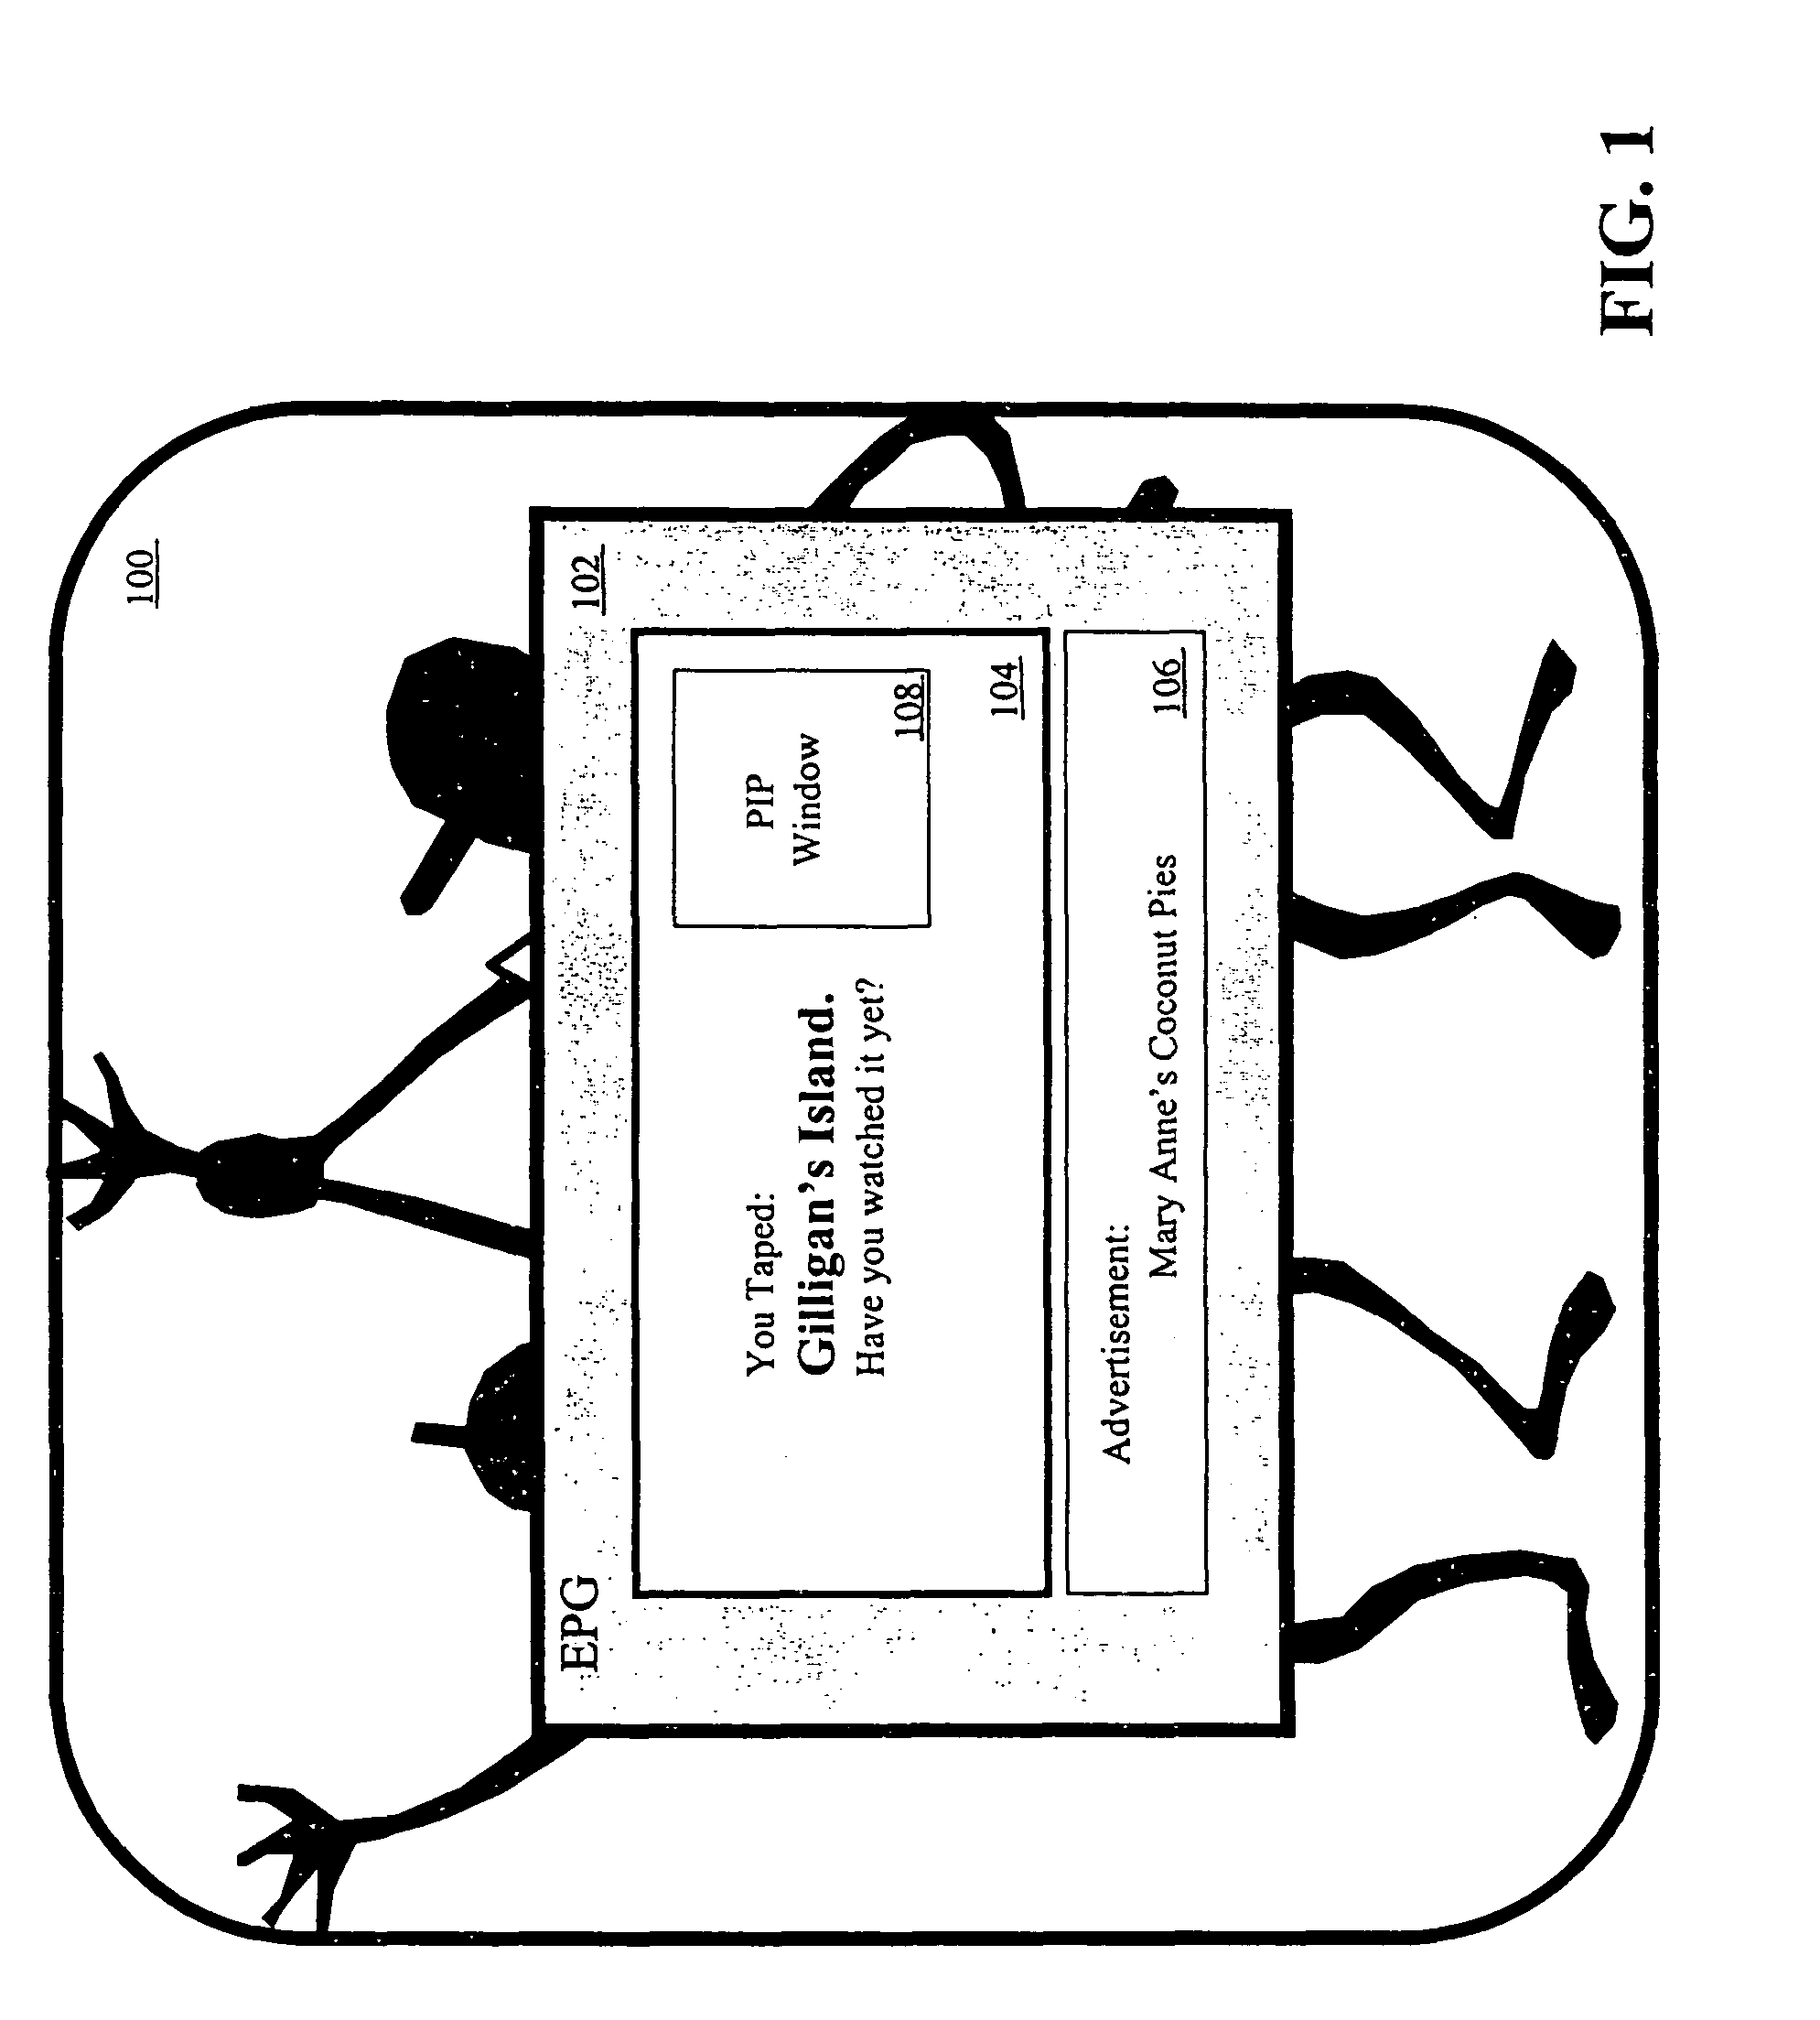 System and method for generating video taping reminders